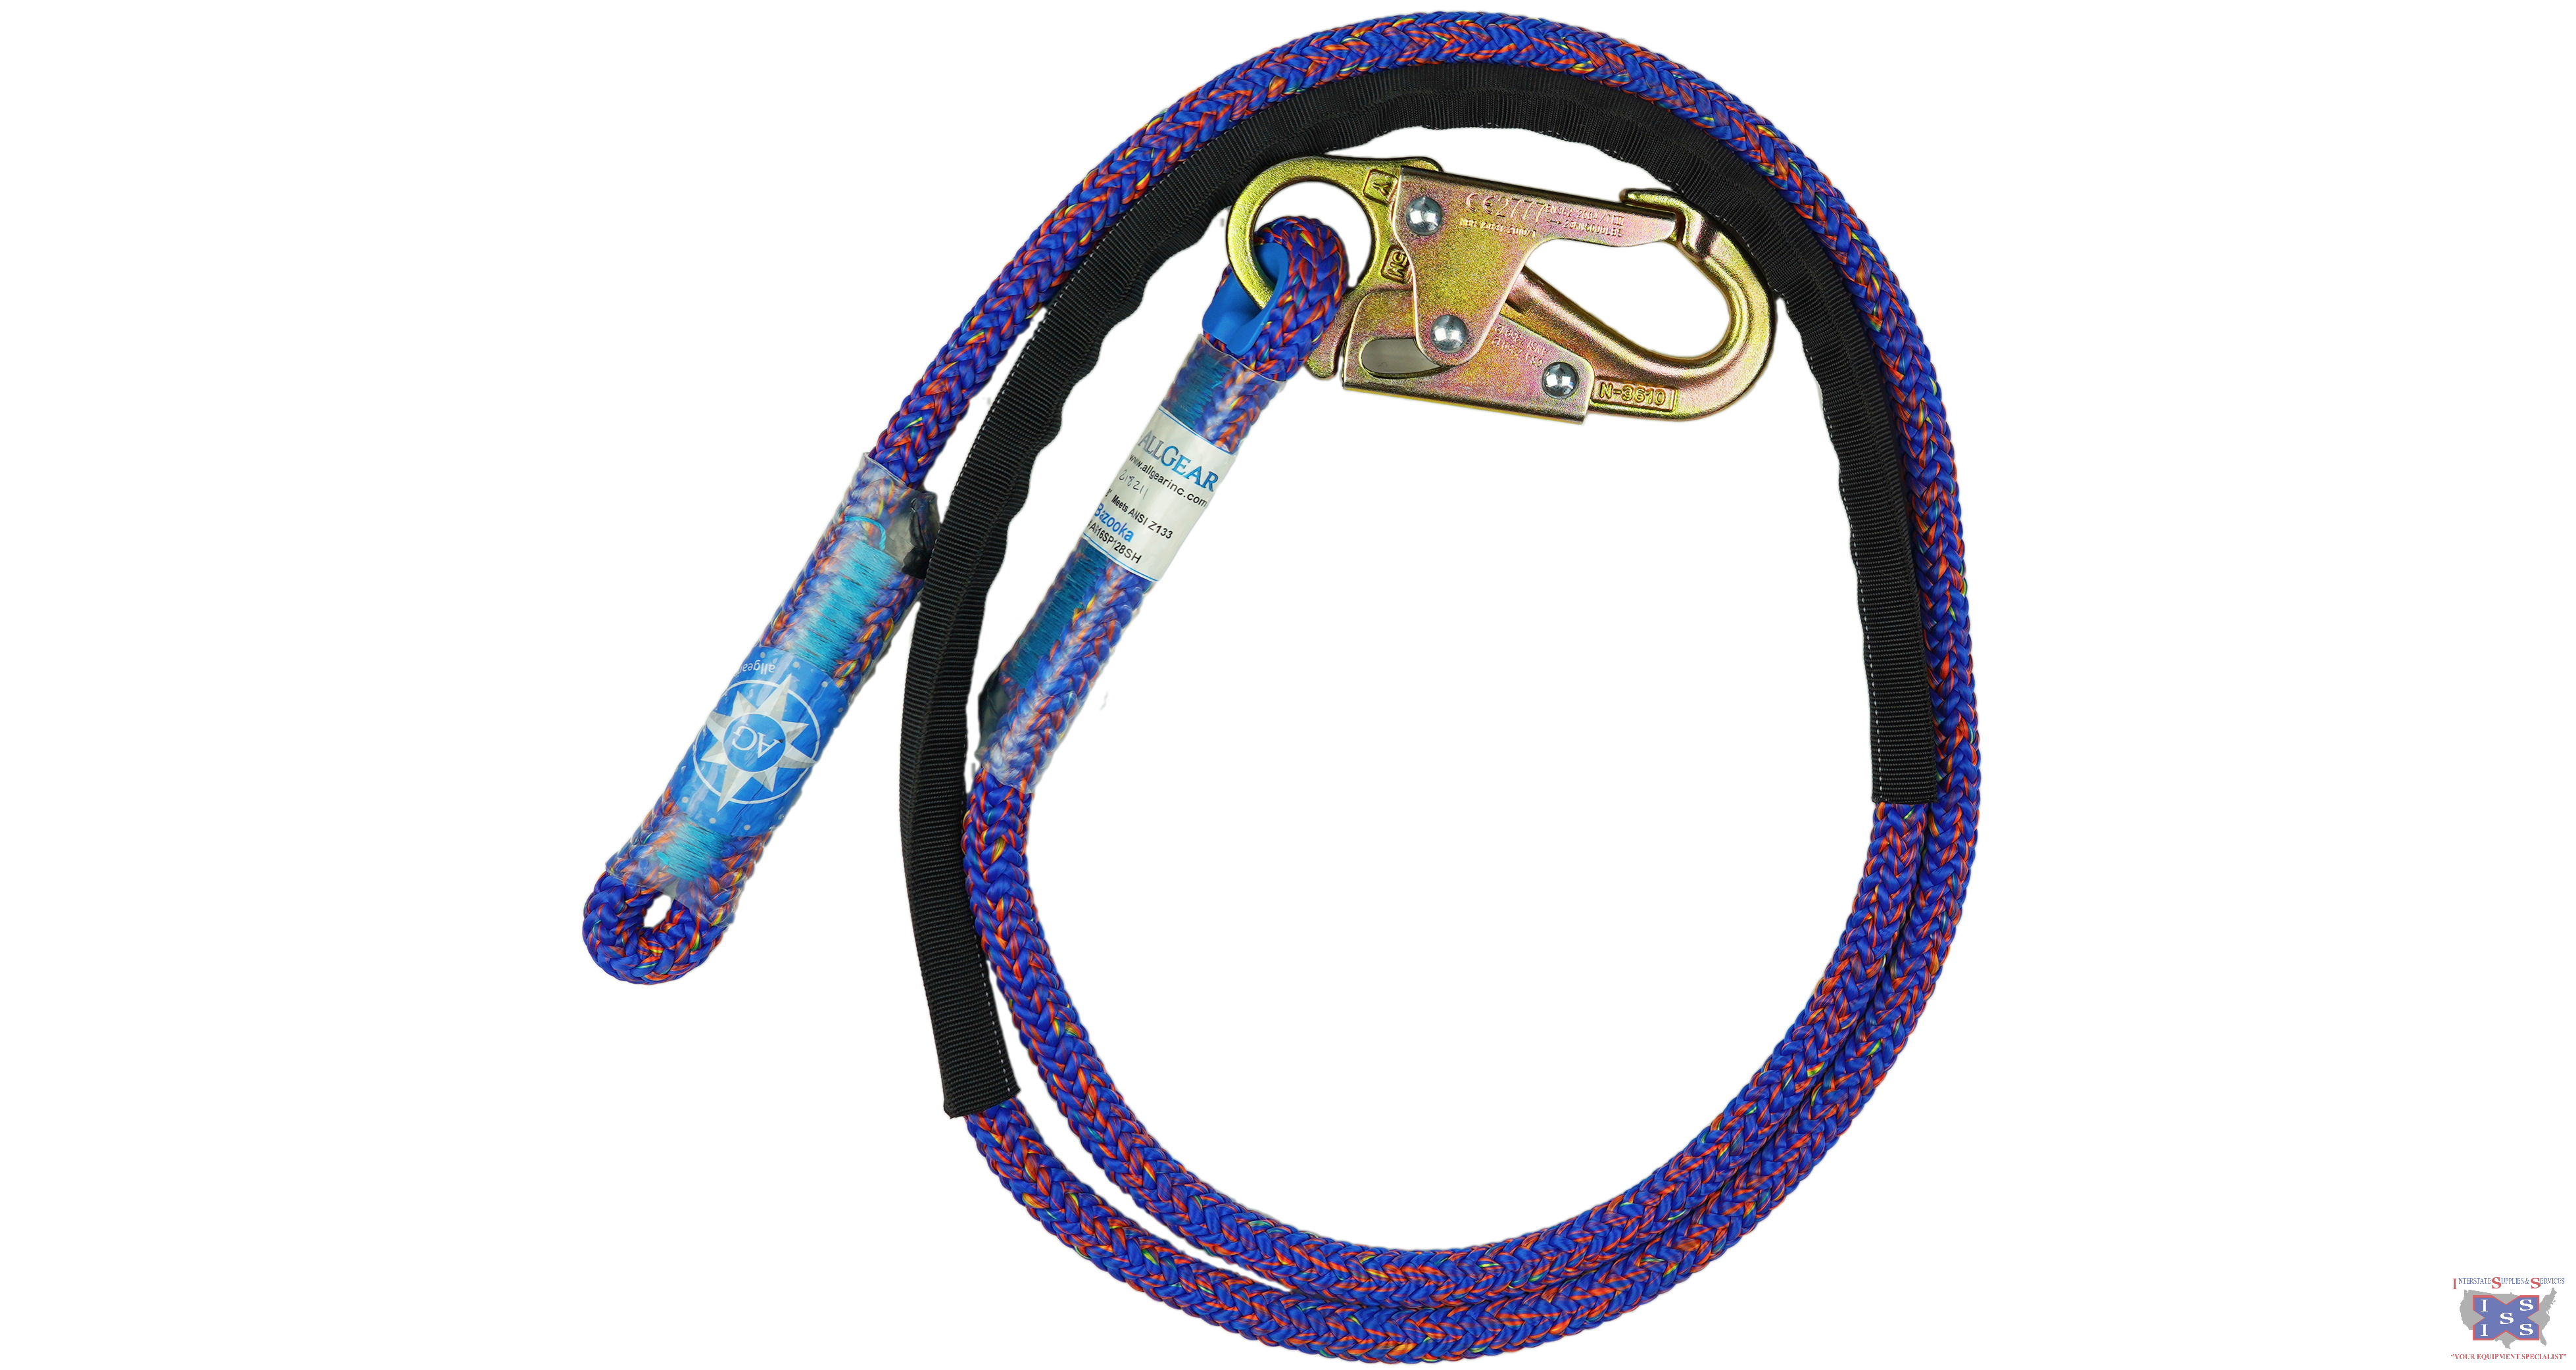 AllGear Extendable Safety Lanyard 1/2" x 20' - Click Image to Close